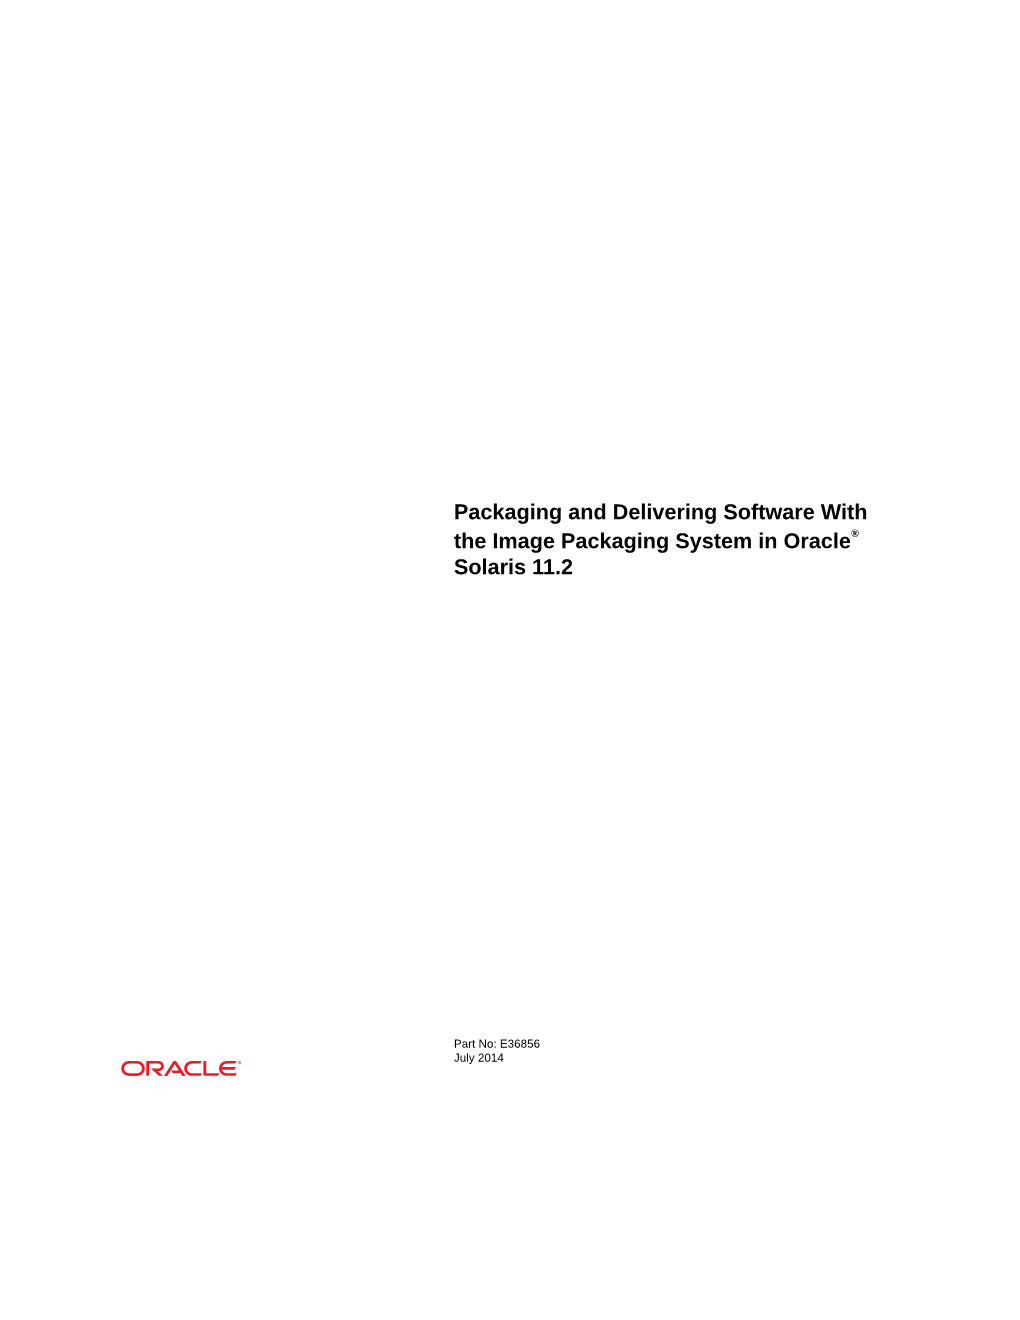 Packaging and Delivering Software with the Image Packaging System in Oracle® Solaris 11.2